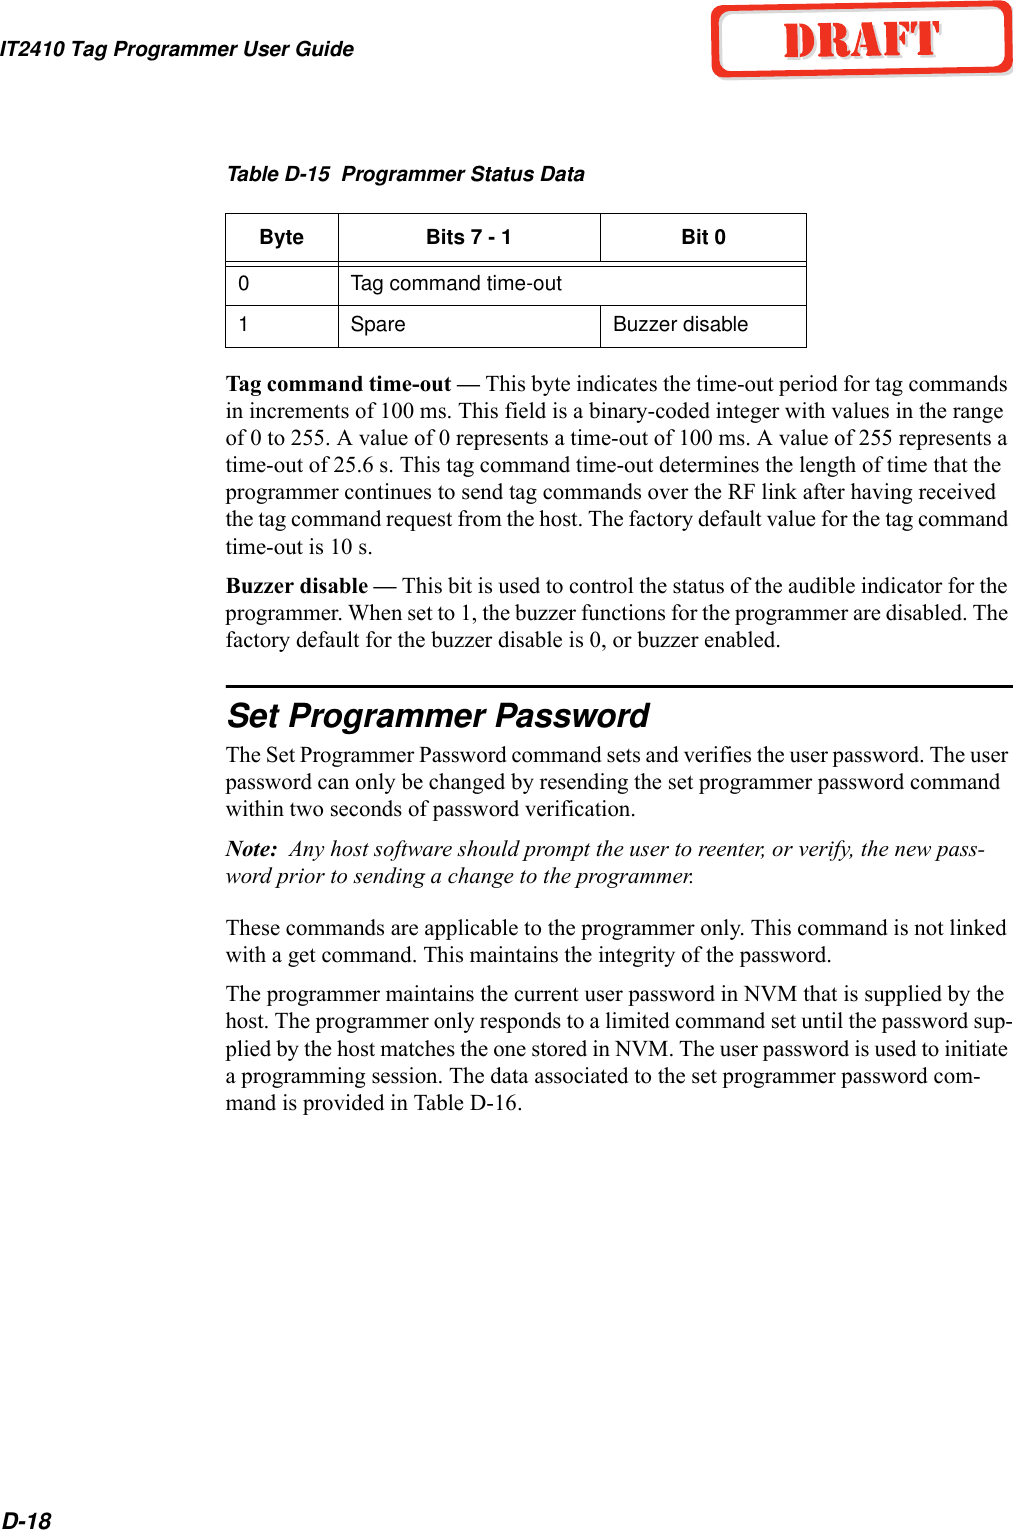 IT2410 Tag Programmer User GuideD-18Table D-15  Programmer Status DataTag command time-out — This byte indicates the time-out period for tag commands in increments of 100 ms. This field is a binary-coded integer with values in the range of 0 to 255. A value of 0 represents a time-out of 100 ms. A value of 255 represents a time-out of 25.6 s. This tag command time-out determines the length of time that the programmer continues to send tag commands over the RF link after having received the tag command request from the host. The factory default value for the tag command time-out is 10 s.Buzzer disable — This bit is used to control the status of the audible indicator for the programmer. When set to 1, the buzzer functions for the programmer are disabled. The factory default for the buzzer disable is 0, or buzzer enabled.Set Programmer PasswordThe Set Programmer Password command sets and verifies the user password. The user password can only be changed by resending the set programmer password command within two seconds of password verification. Note:  Any host software should prompt the user to reenter, or verify, the new pass-word prior to sending a change to the programmer.These commands are applicable to the programmer only. This command is not linked with a get command. This maintains the integrity of the password.The programmer maintains the current user password in NVM that is supplied by the host. The programmer only responds to a limited command set until the password sup-plied by the host matches the one stored in NVM. The user password is used to initiate a programming session. The data associated to the set programmer password com-mand is provided in Table D-16.Byte Bits 7 - 1 Bit 00Tag command time-out1Spare Buzzer disable